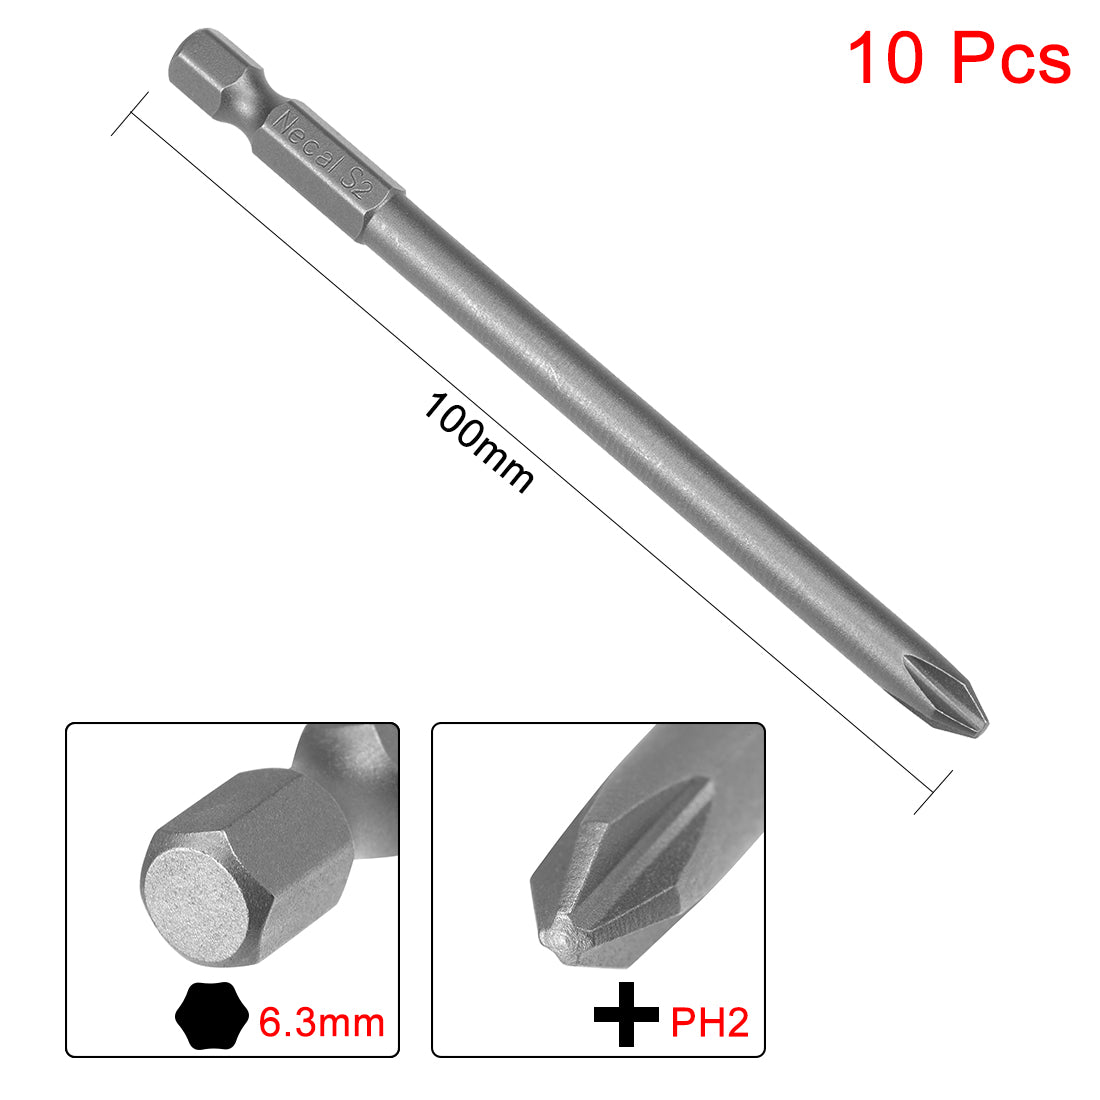 Uxcell Uxcell 10pcs 100mm 1/4" Hex Shank 4.5mm PH1 Magnetic Phillips Head Screwdriver Bits S2